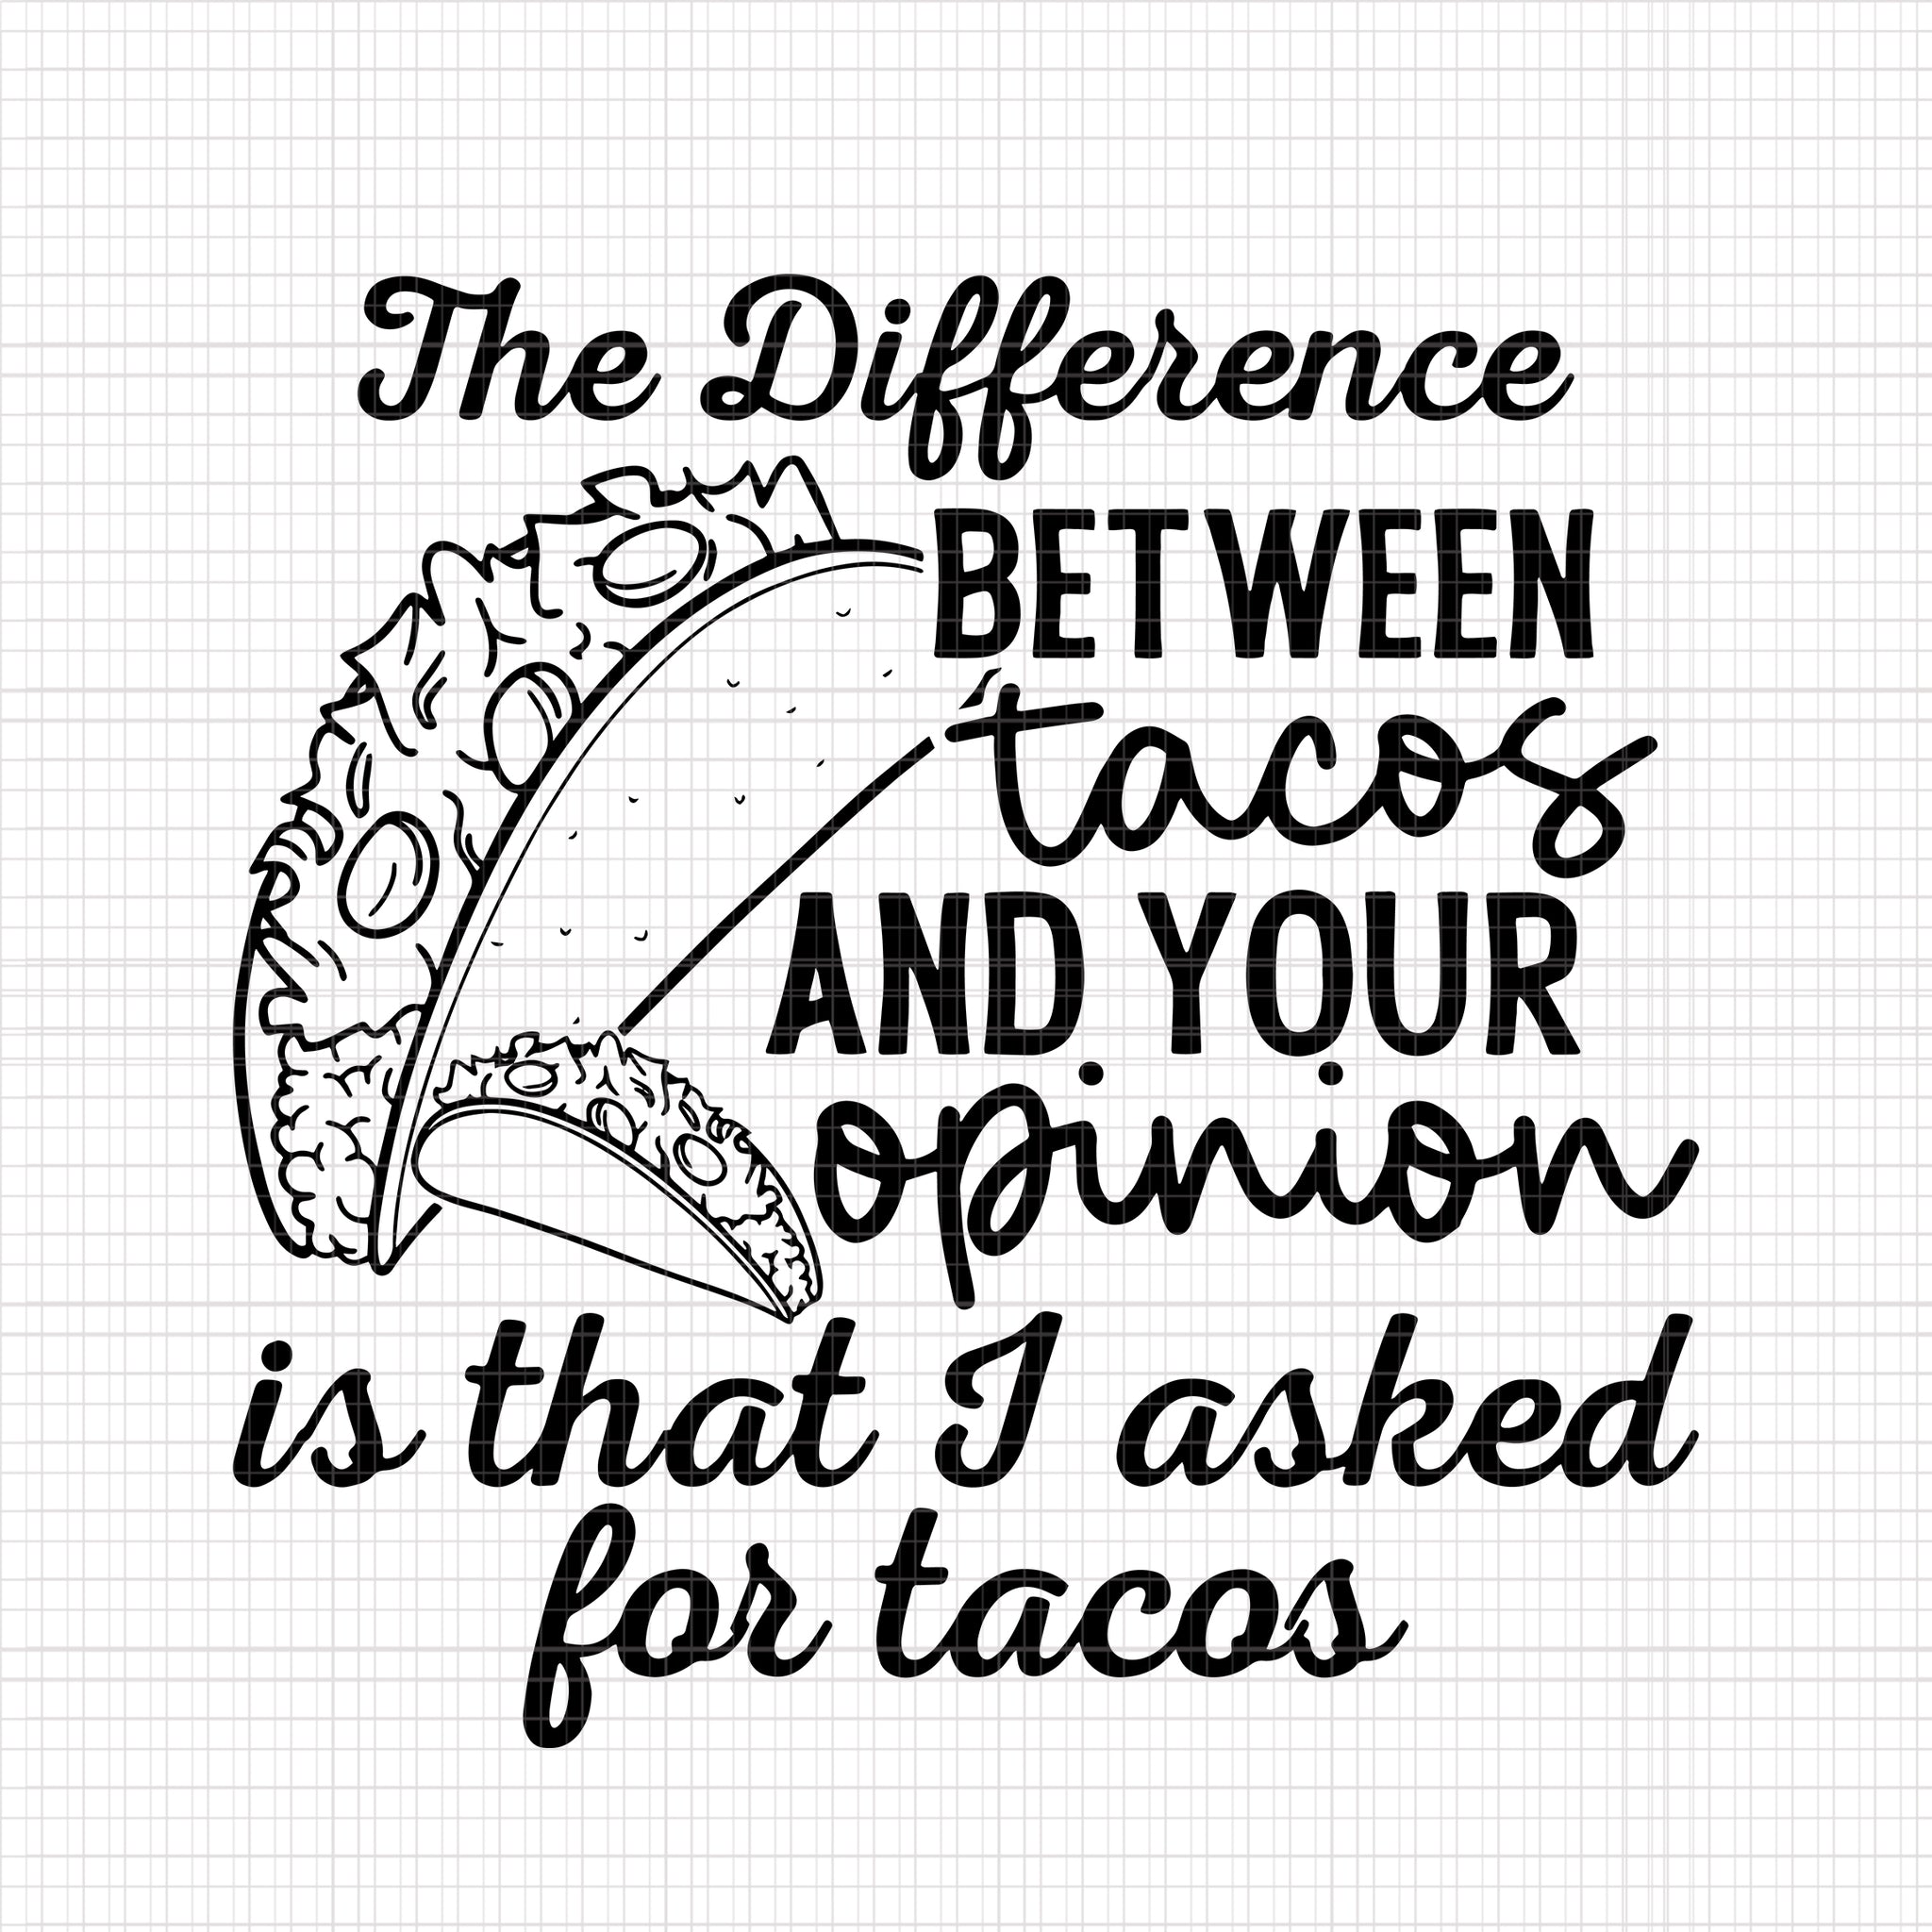 The Difference Between Tacos And Your Opinion, Is That I Asked For Tacos, Tacos Svg, Tacos And Your Opinion